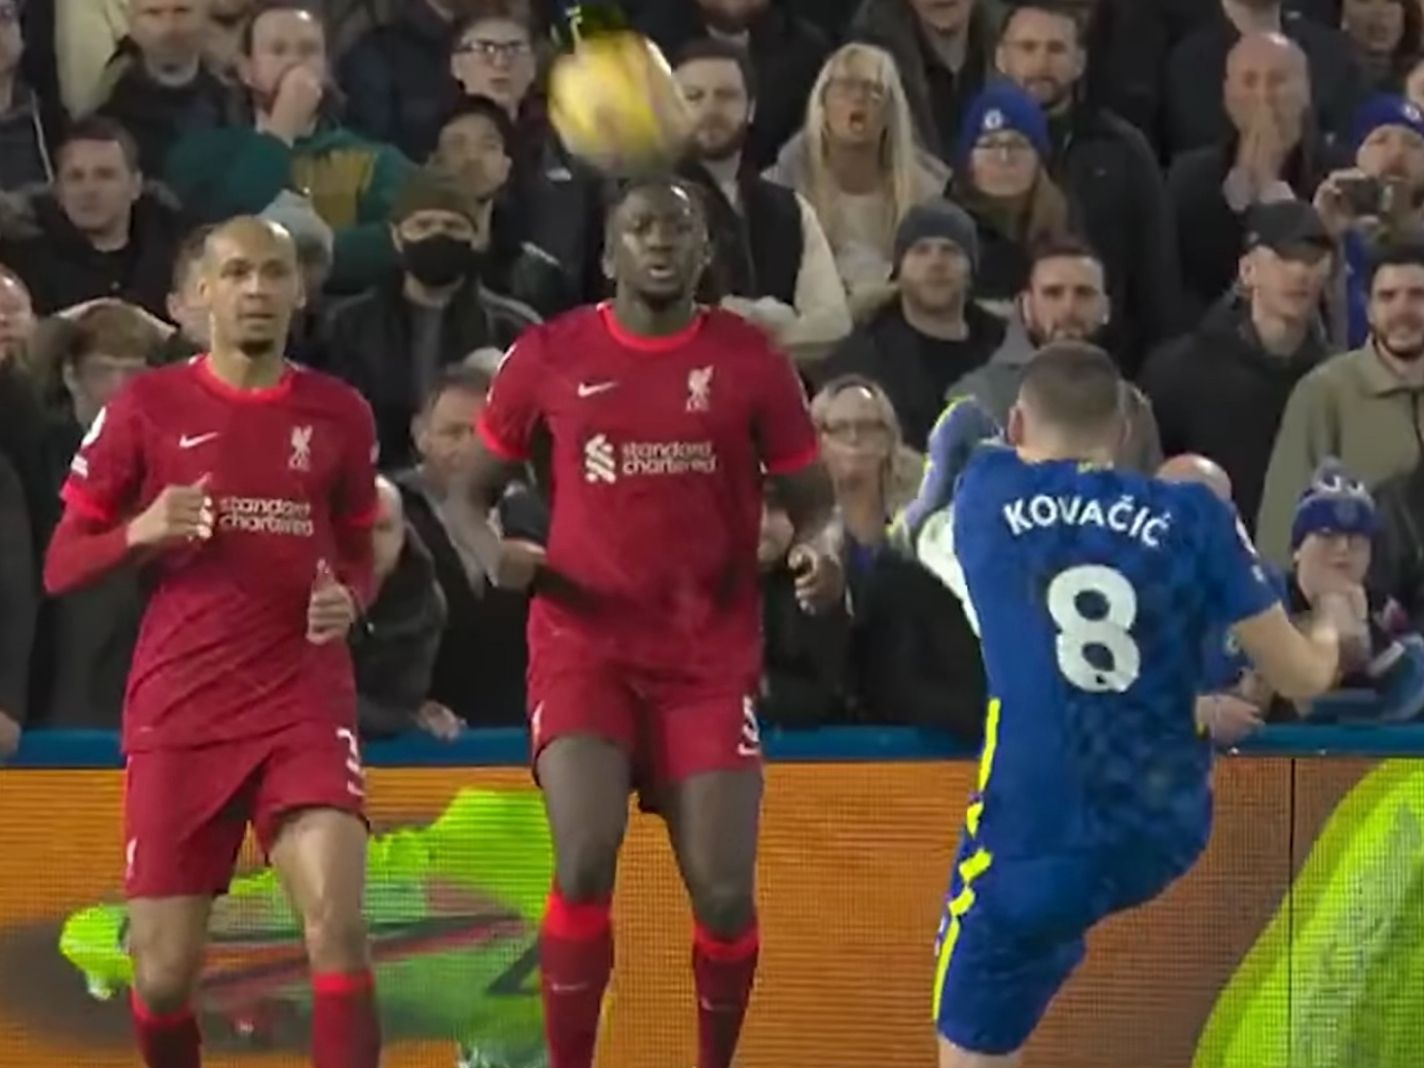 The moment of genius from Mateo Kovacic that left Fabinho humiliated